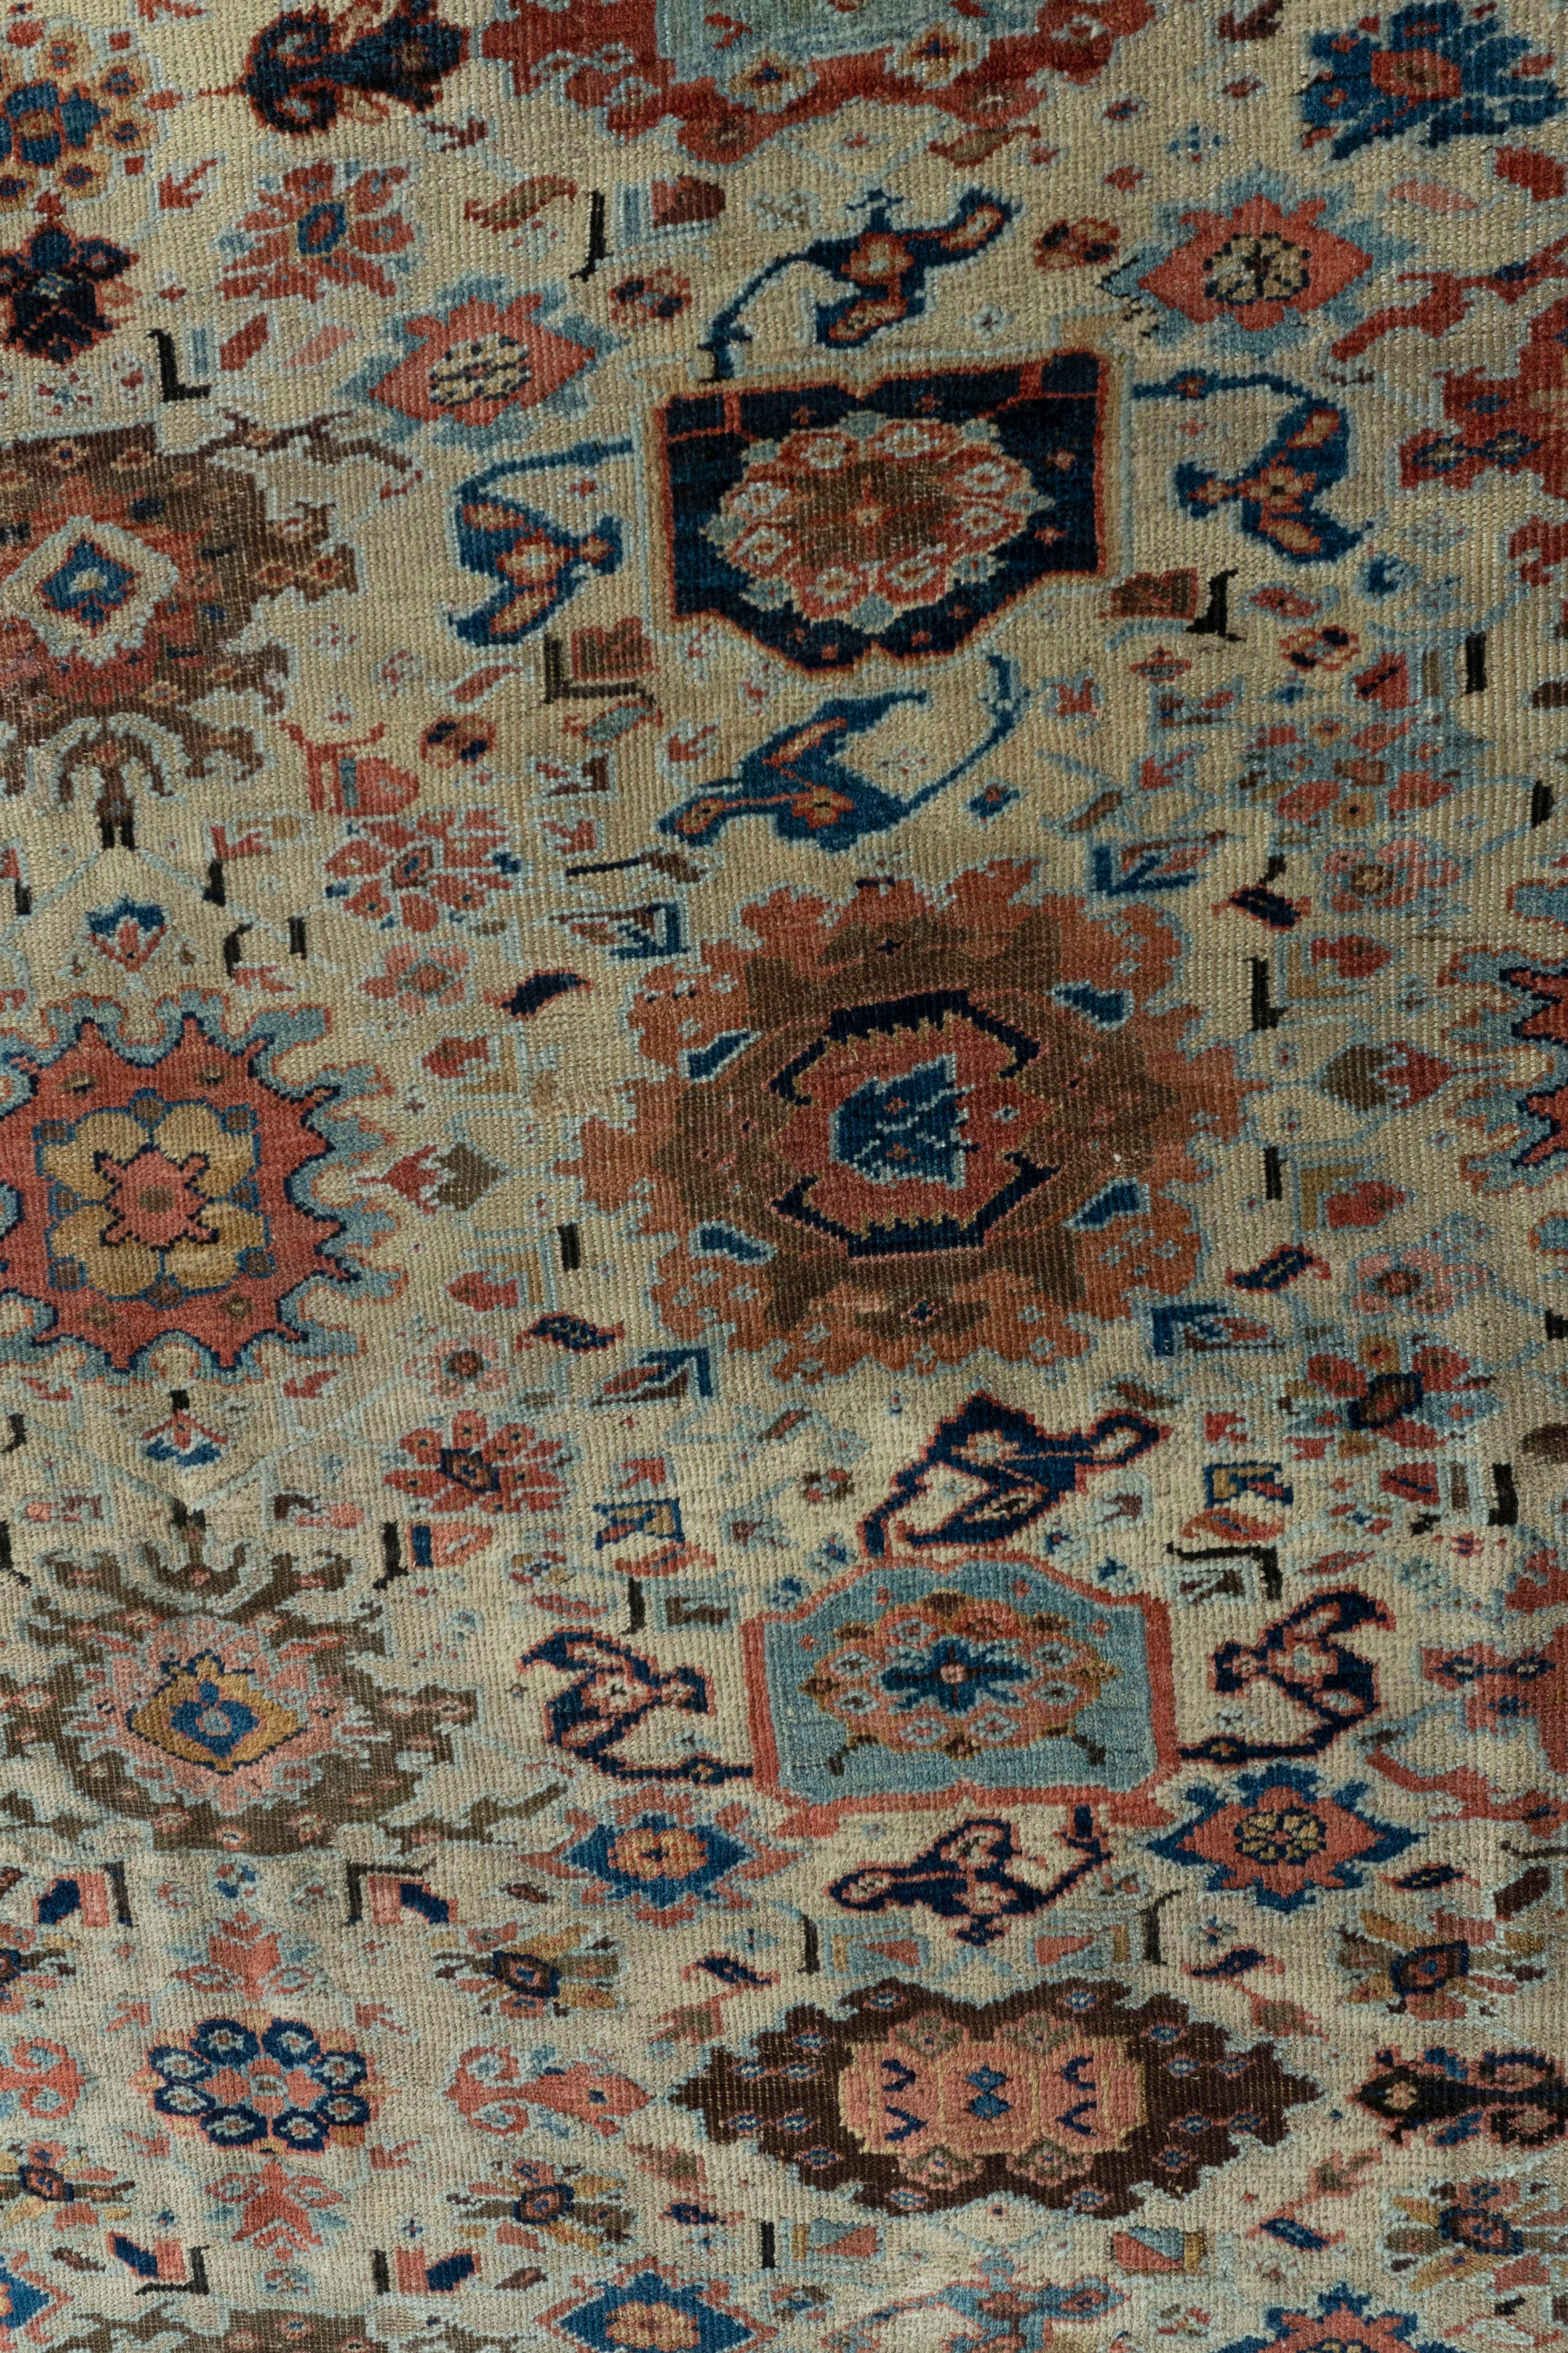 Antique Persian Sultanabad Rug 8' X 12'6. Sultanabad is one of those magical Oriental rug types, something to conjure with. There are real Sultanabad's, of which this is one, those moderately coarse carpets woven in the Sultanabad/ Arak (Markazai)